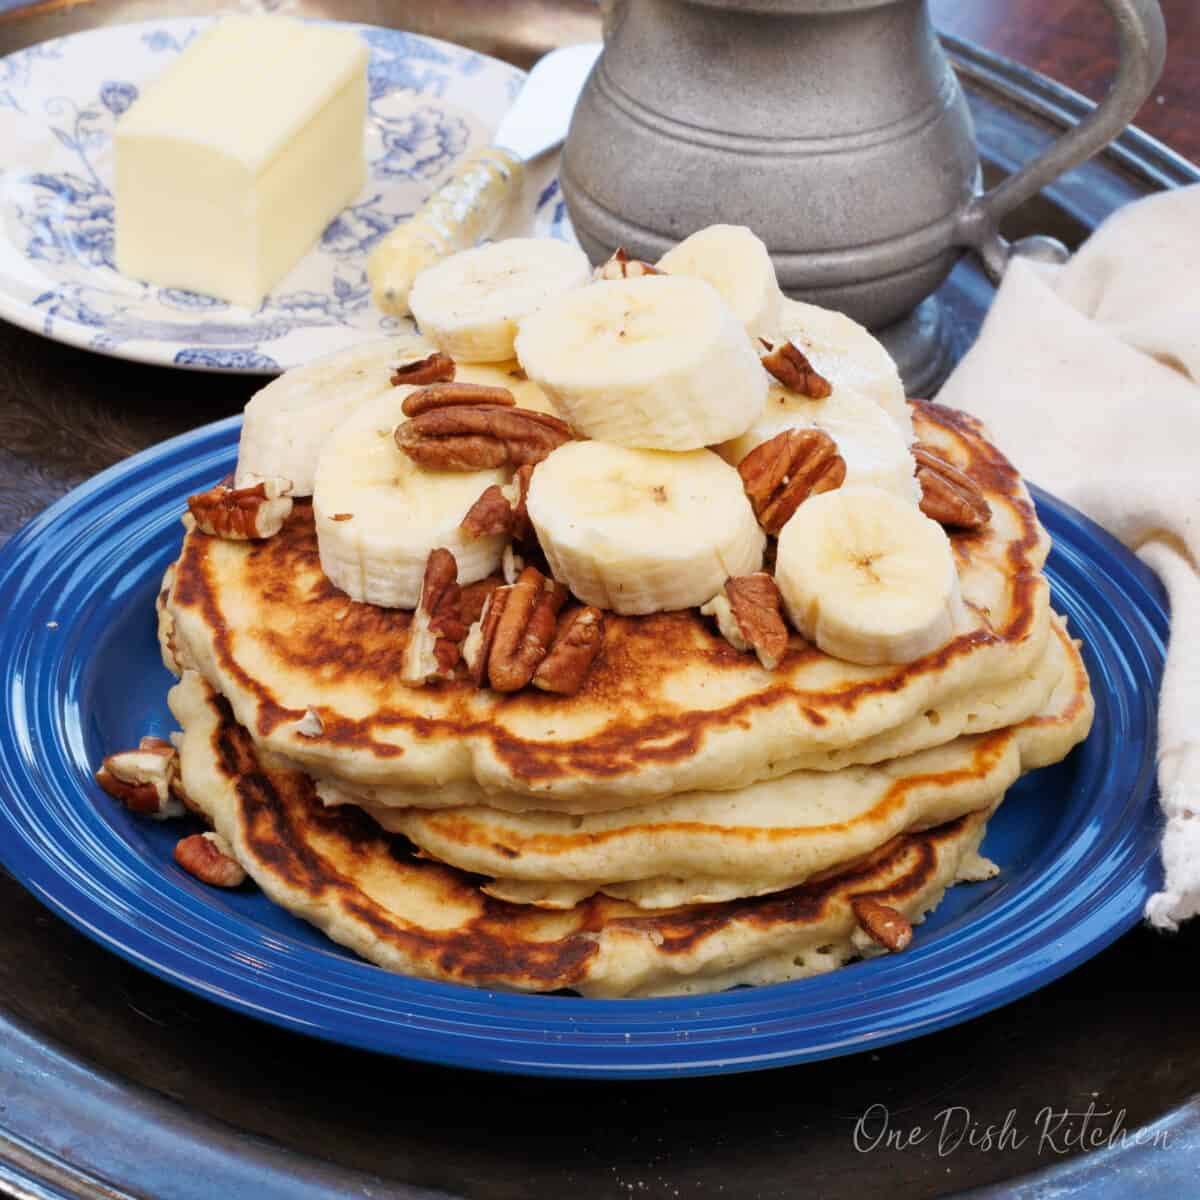 banana pancakes on a plate next to a plate of butter and a jug of syrup.